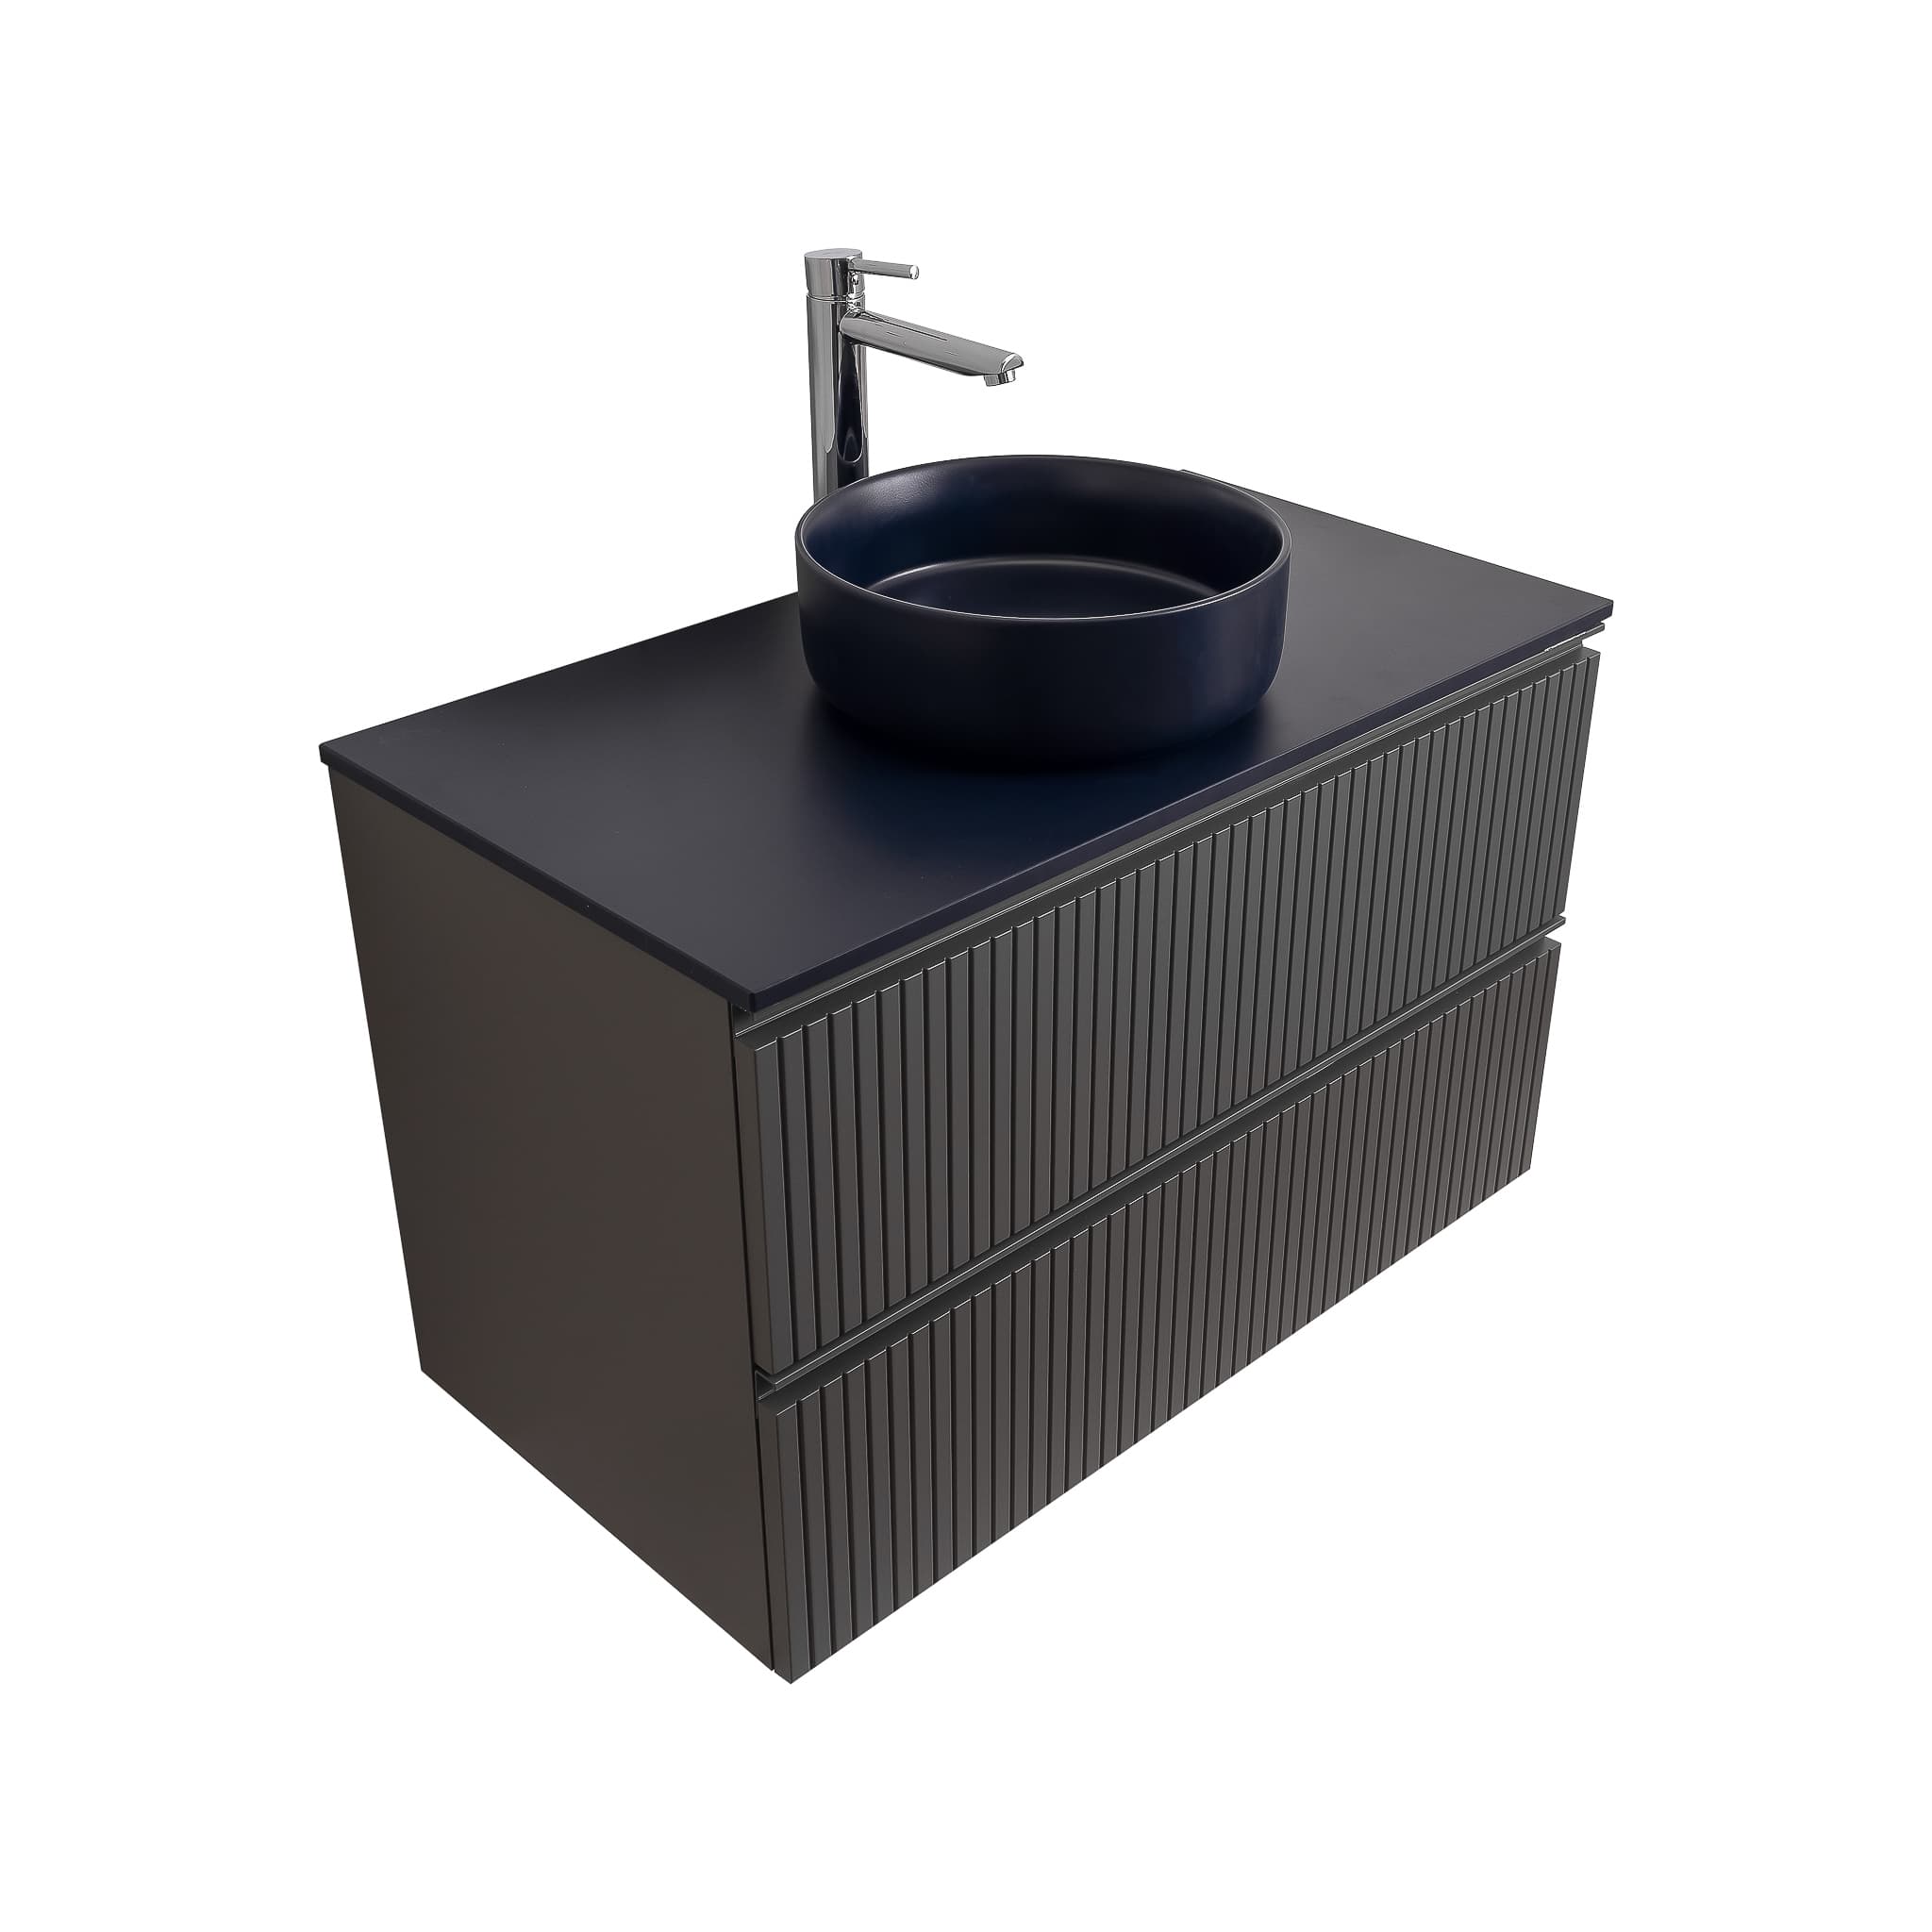 Ares 35.5 Matte Grey Cabinet, Ares Navy Blue Top And Ares Navy Blue Ceramic Basin, Wall Mounted Modern Vanity Set